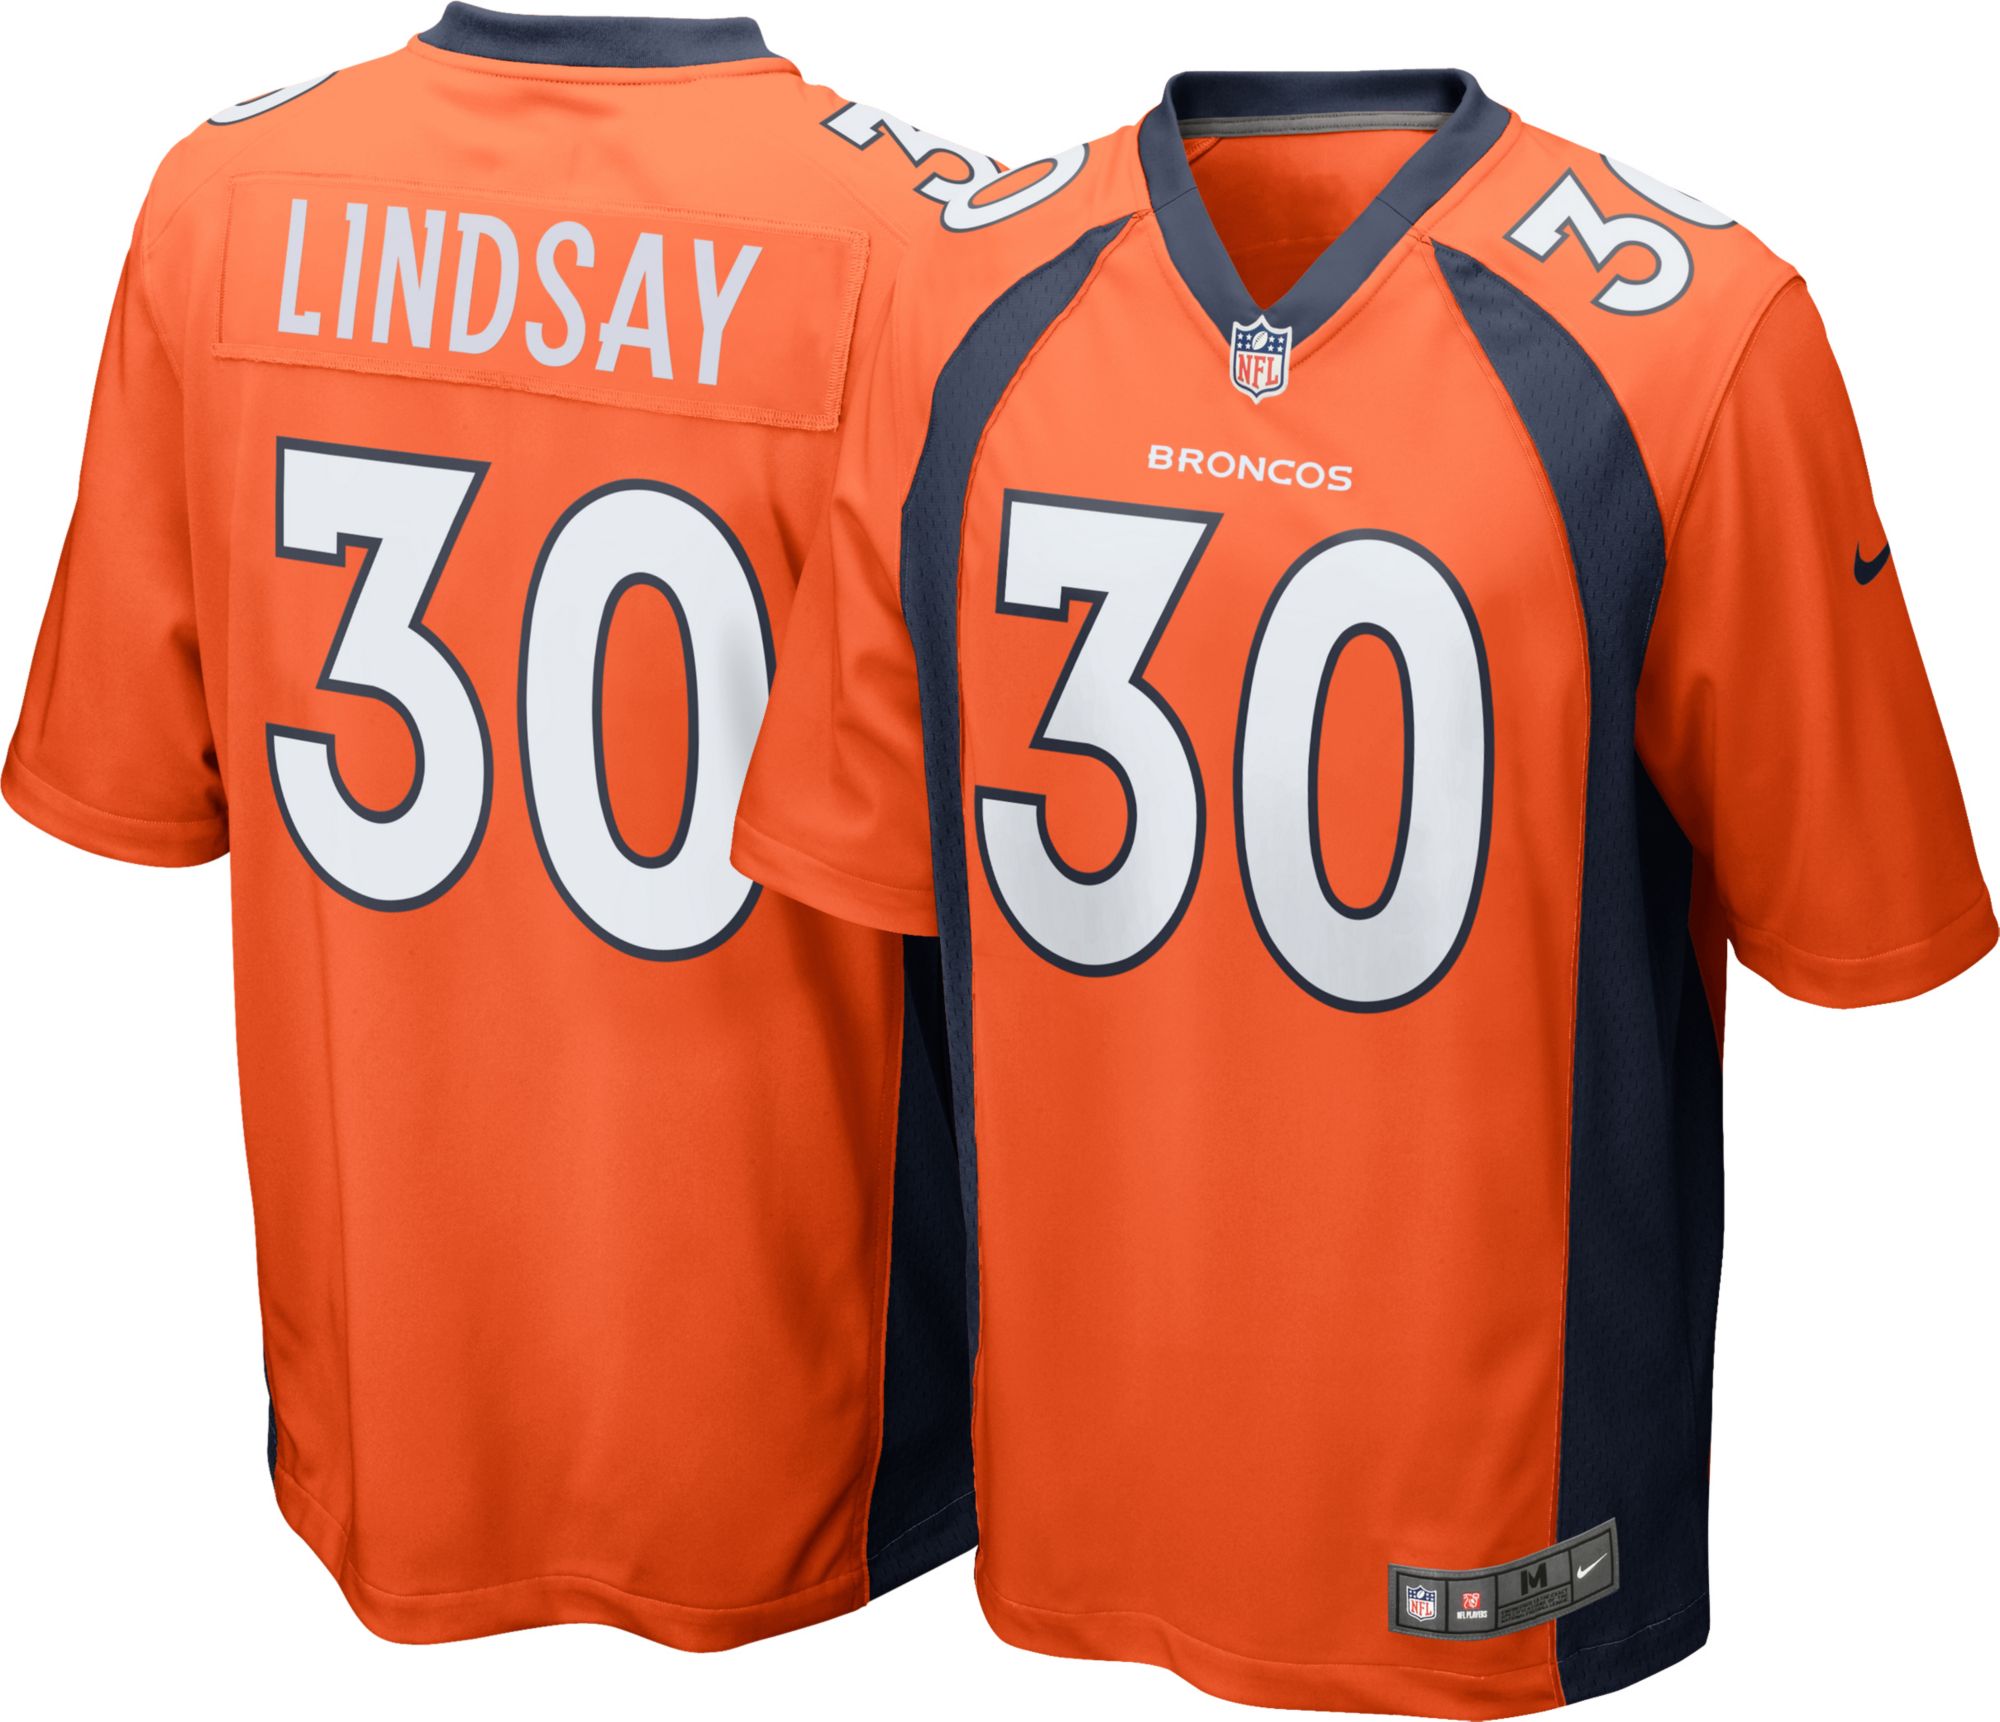 phillip lindsay jersey youth